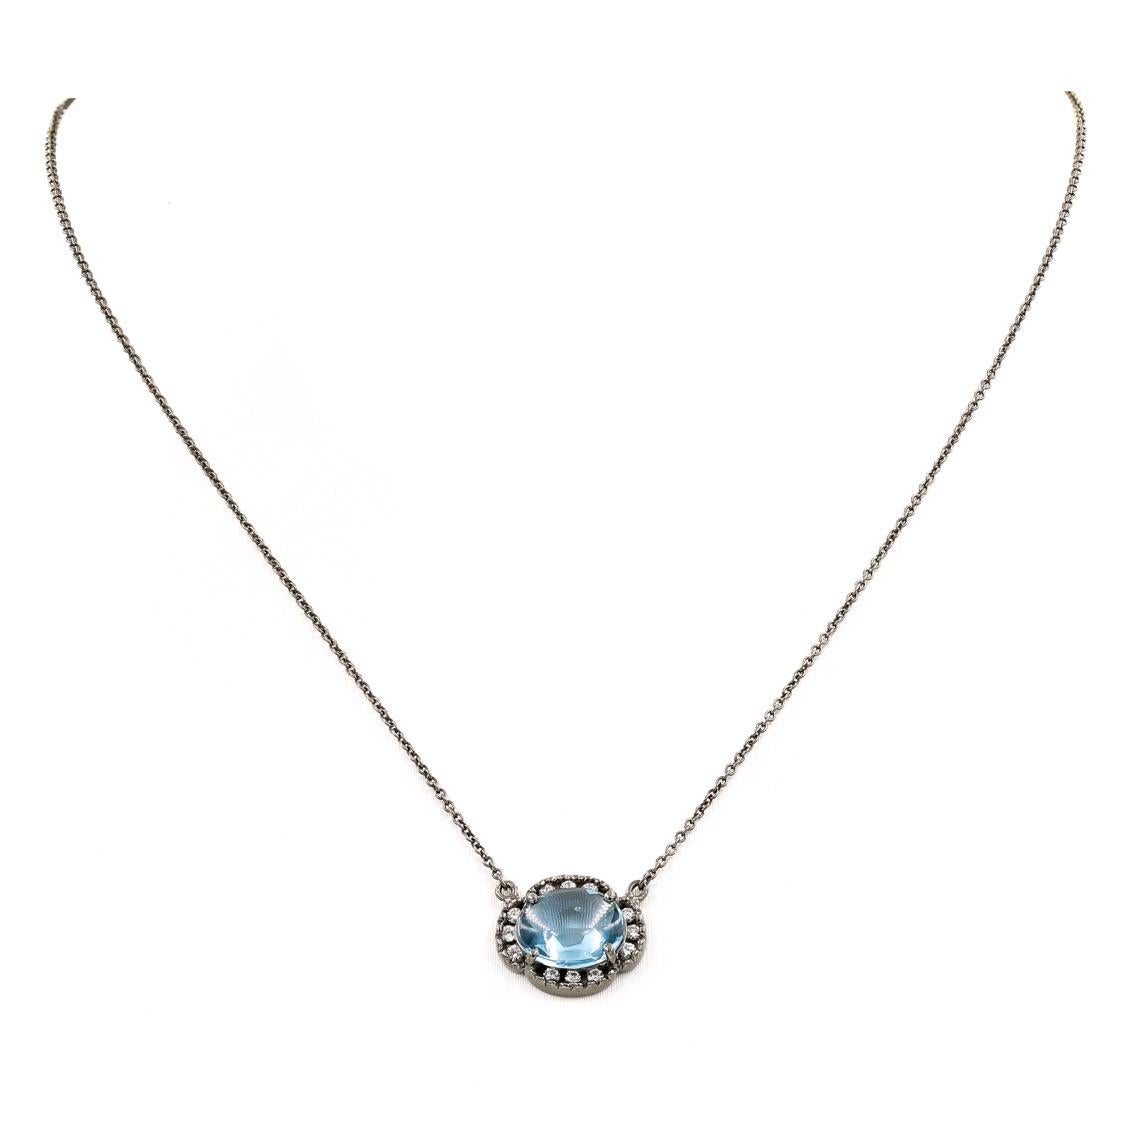 Women's Oval Cut Cabochon Blue Topaz and Round Diamond Necklace